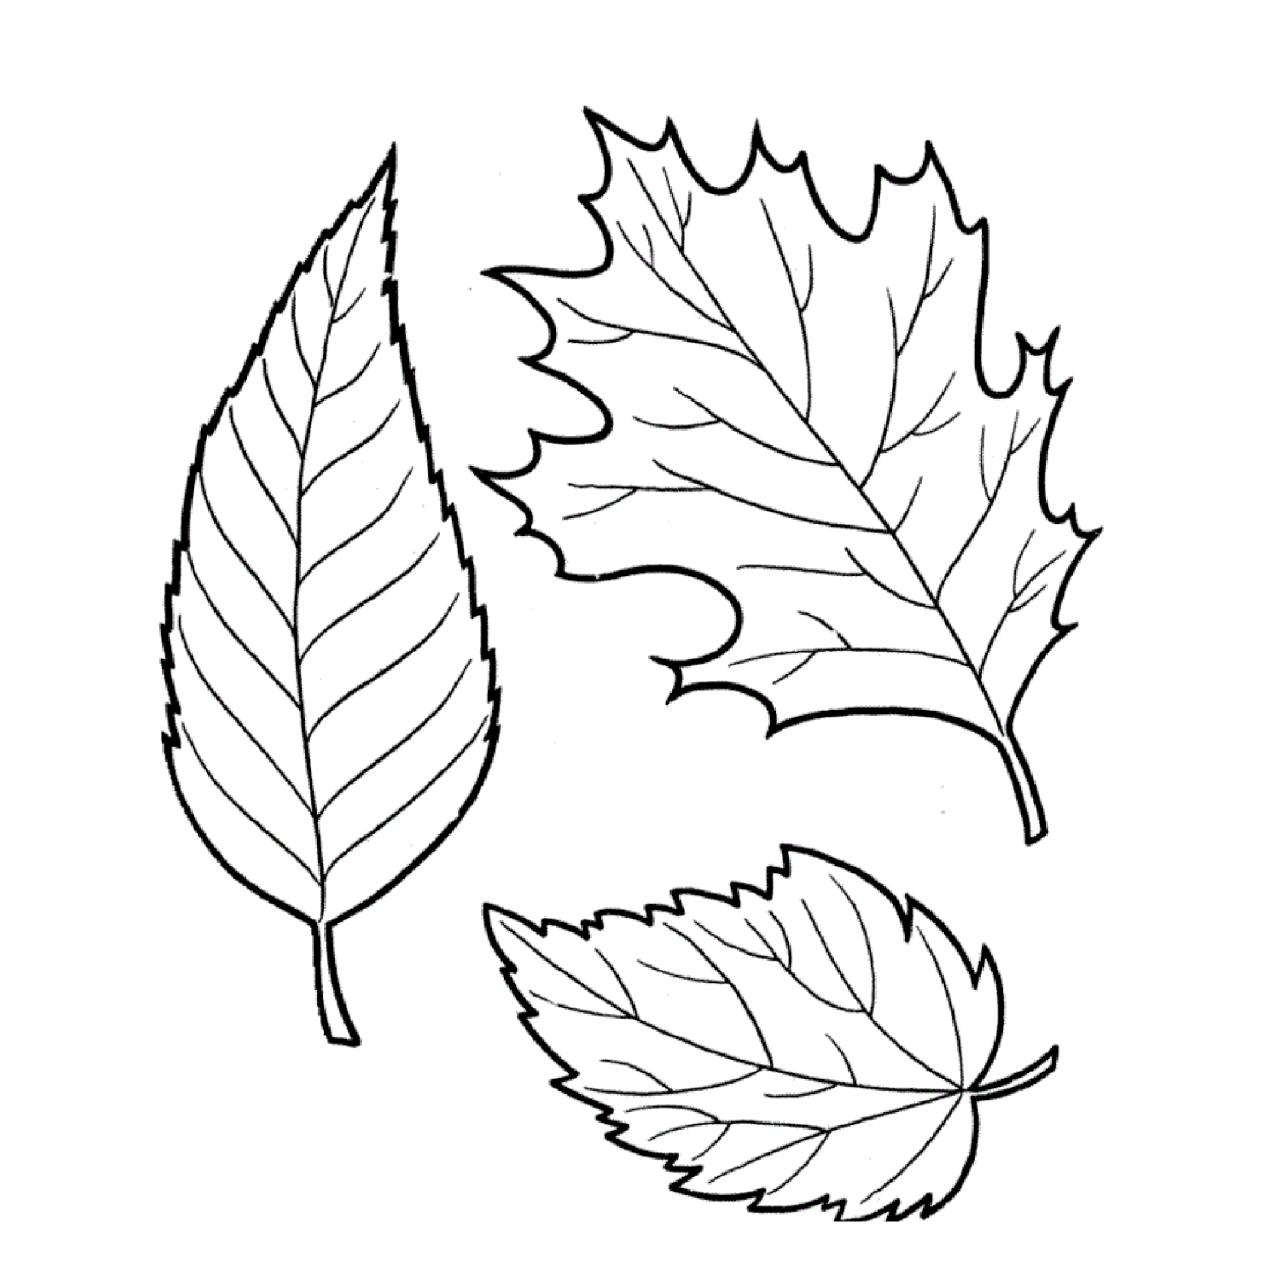 Tree leaves coloring pages for kids to print for free